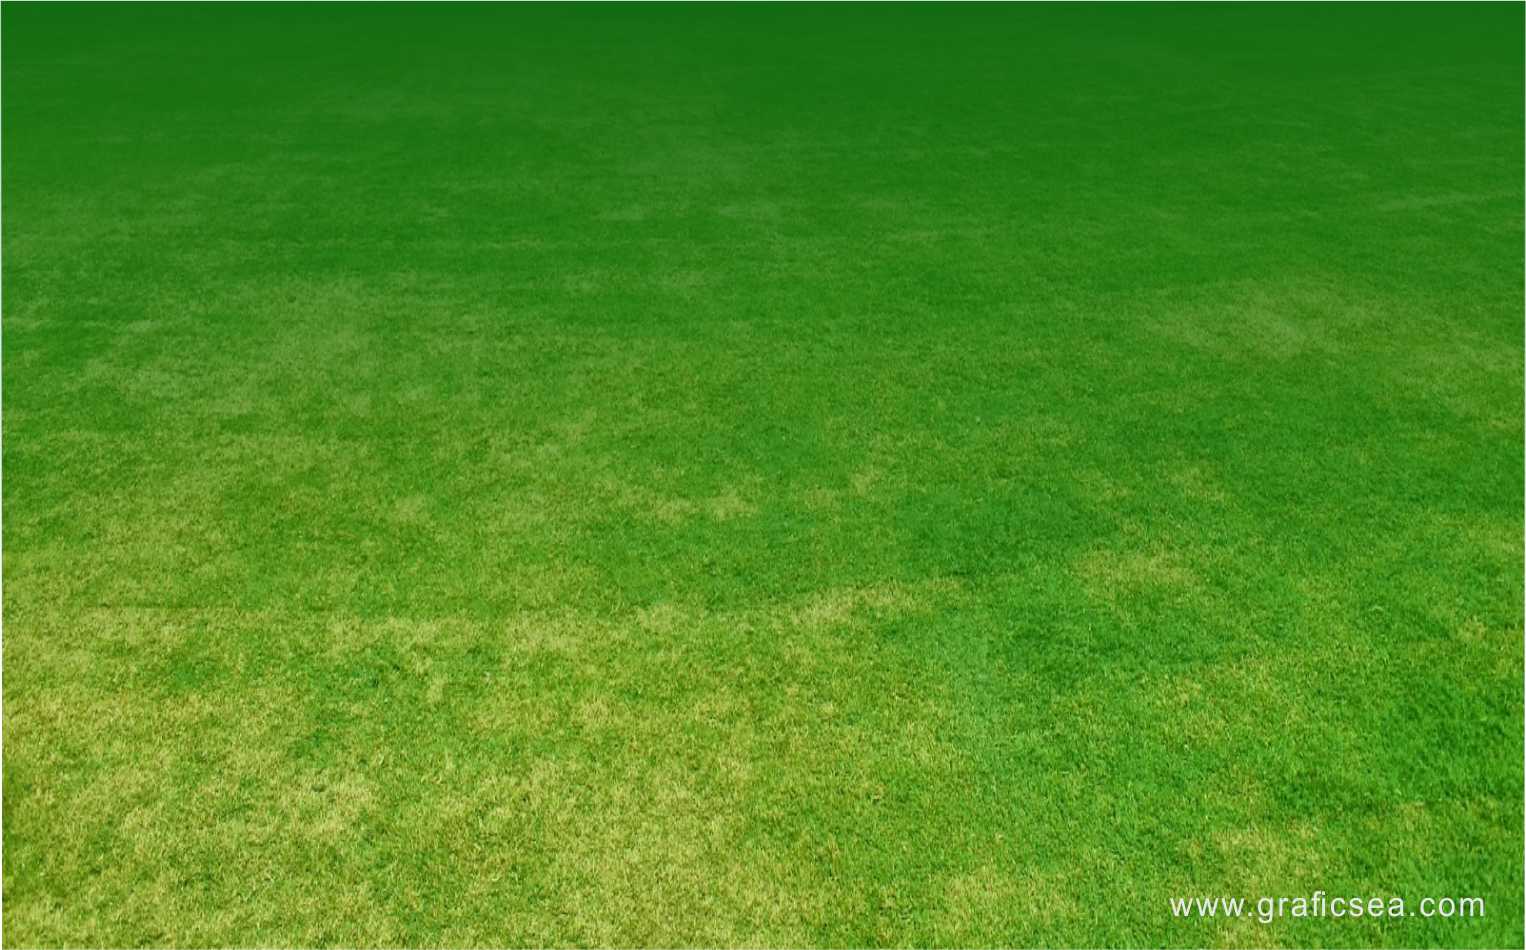 Play Ground Grass Background hd image free download